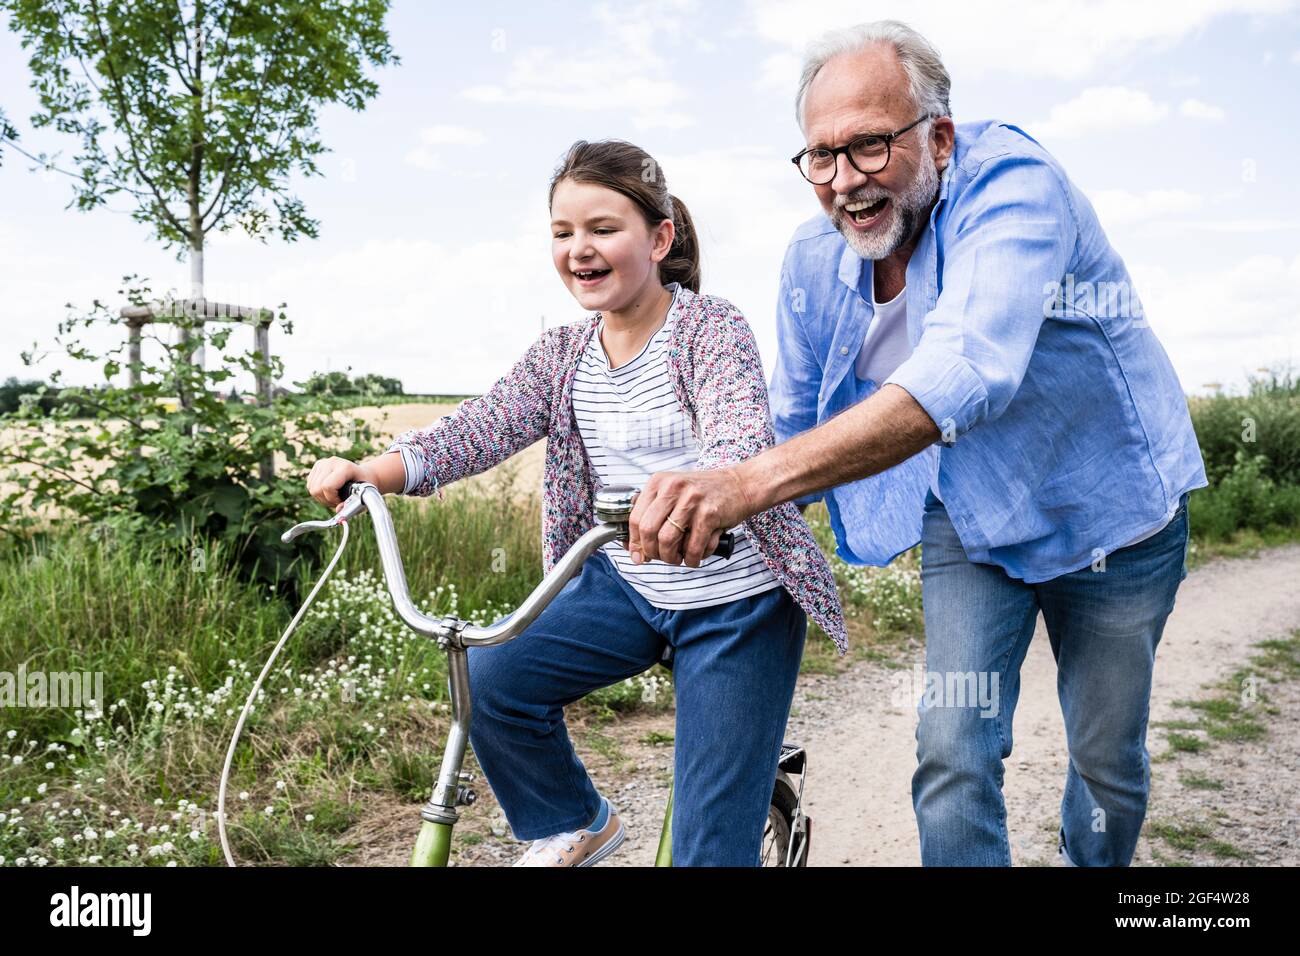 Cheerful grandfather playing with granddaughter cycling on dirt road Stock Photo